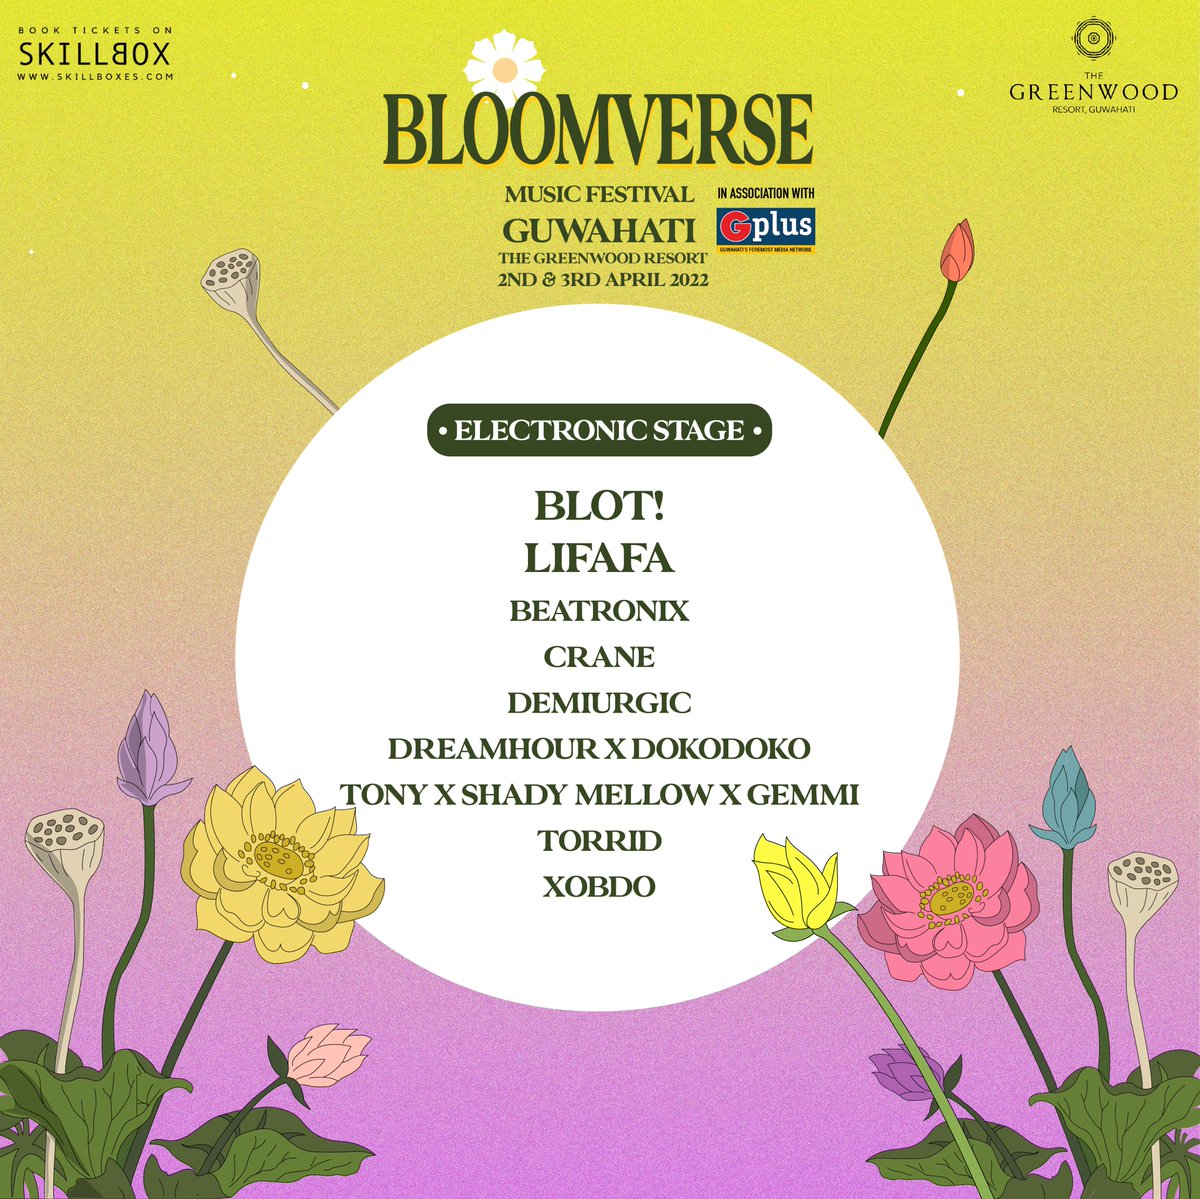 Immerse yourself in the world of complex rhythmic beats & strong drops. Become entranced by the thumping basslines & soaring rhythms & move along the beat with these artists at #bloomversefestival. GRAB YOUR PASSES NOW: linktr.ee/skillboxoffici… @SkillBoxIndia #skillbox